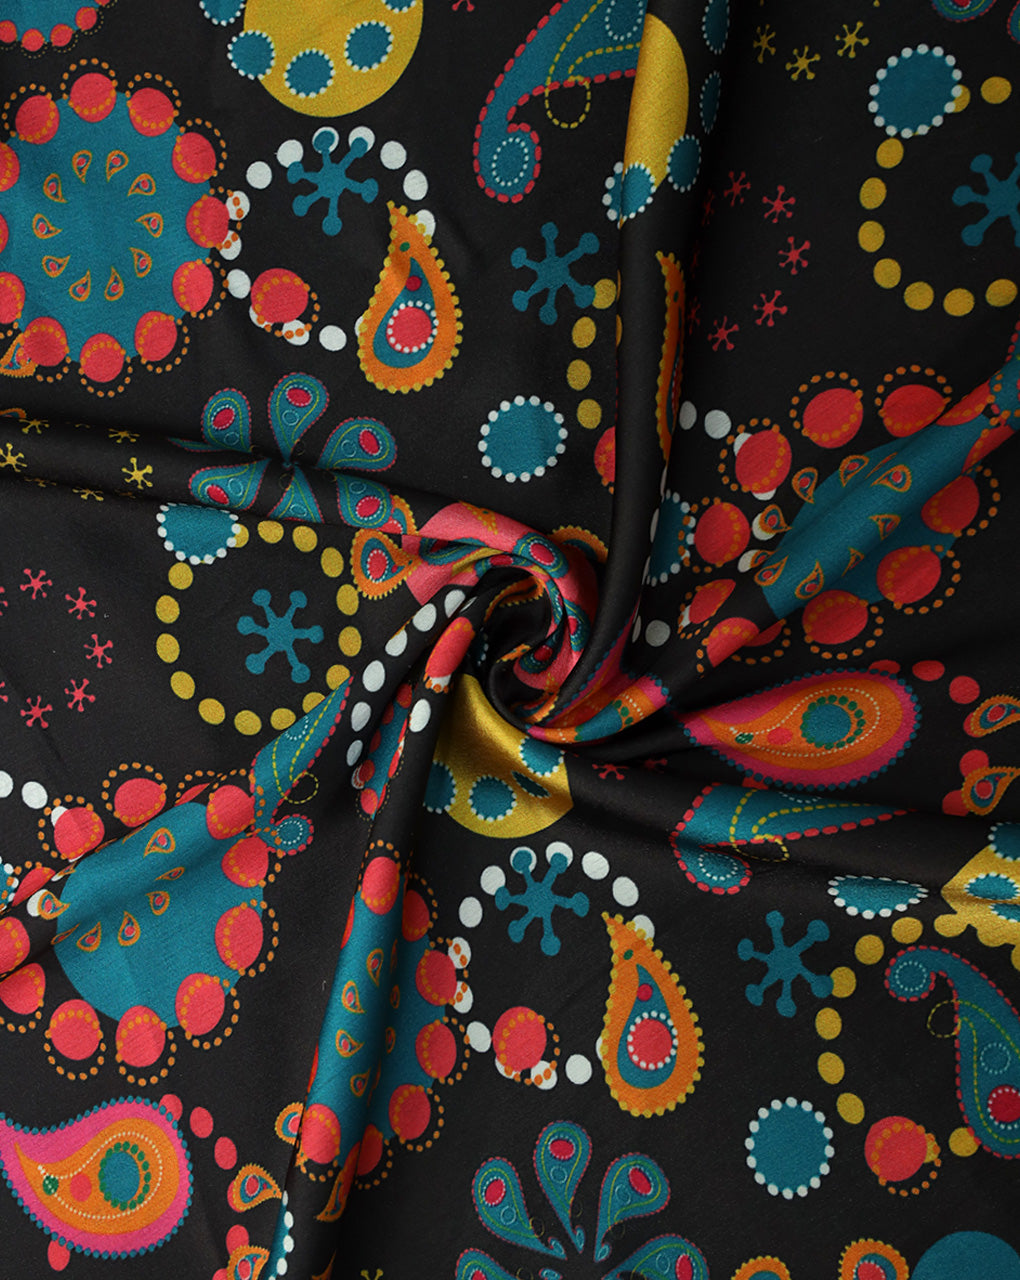 ABSTRACT DESIGN POLYESTER SATIN PRINTED FABRIC